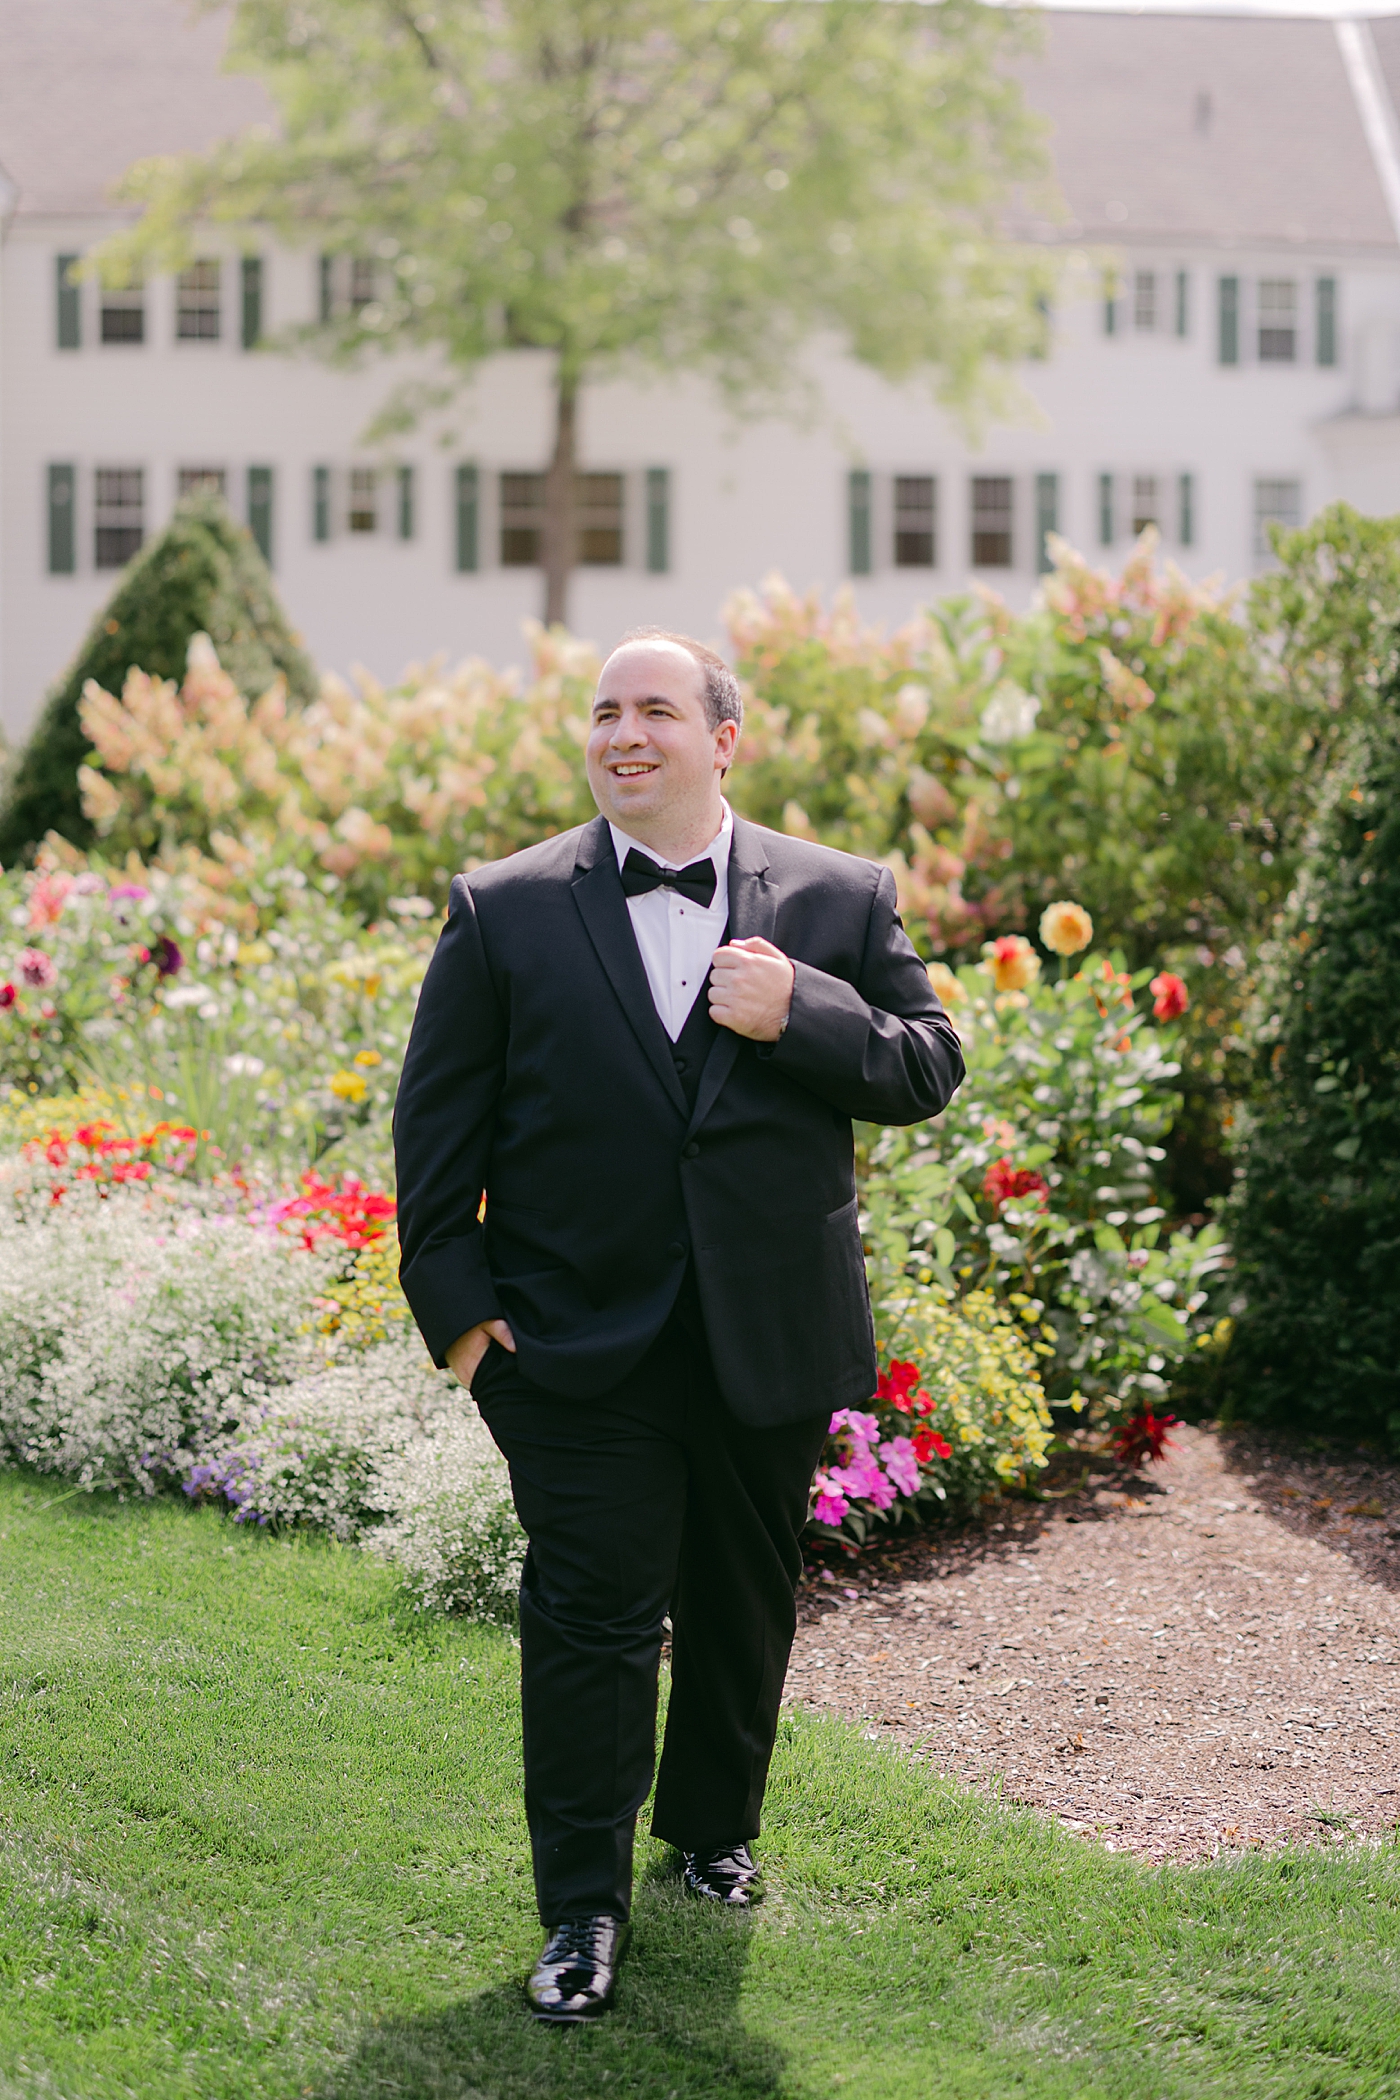 Formal portrait of a groom by himself looking away from the camera | Image by Hope Helmuth Photography